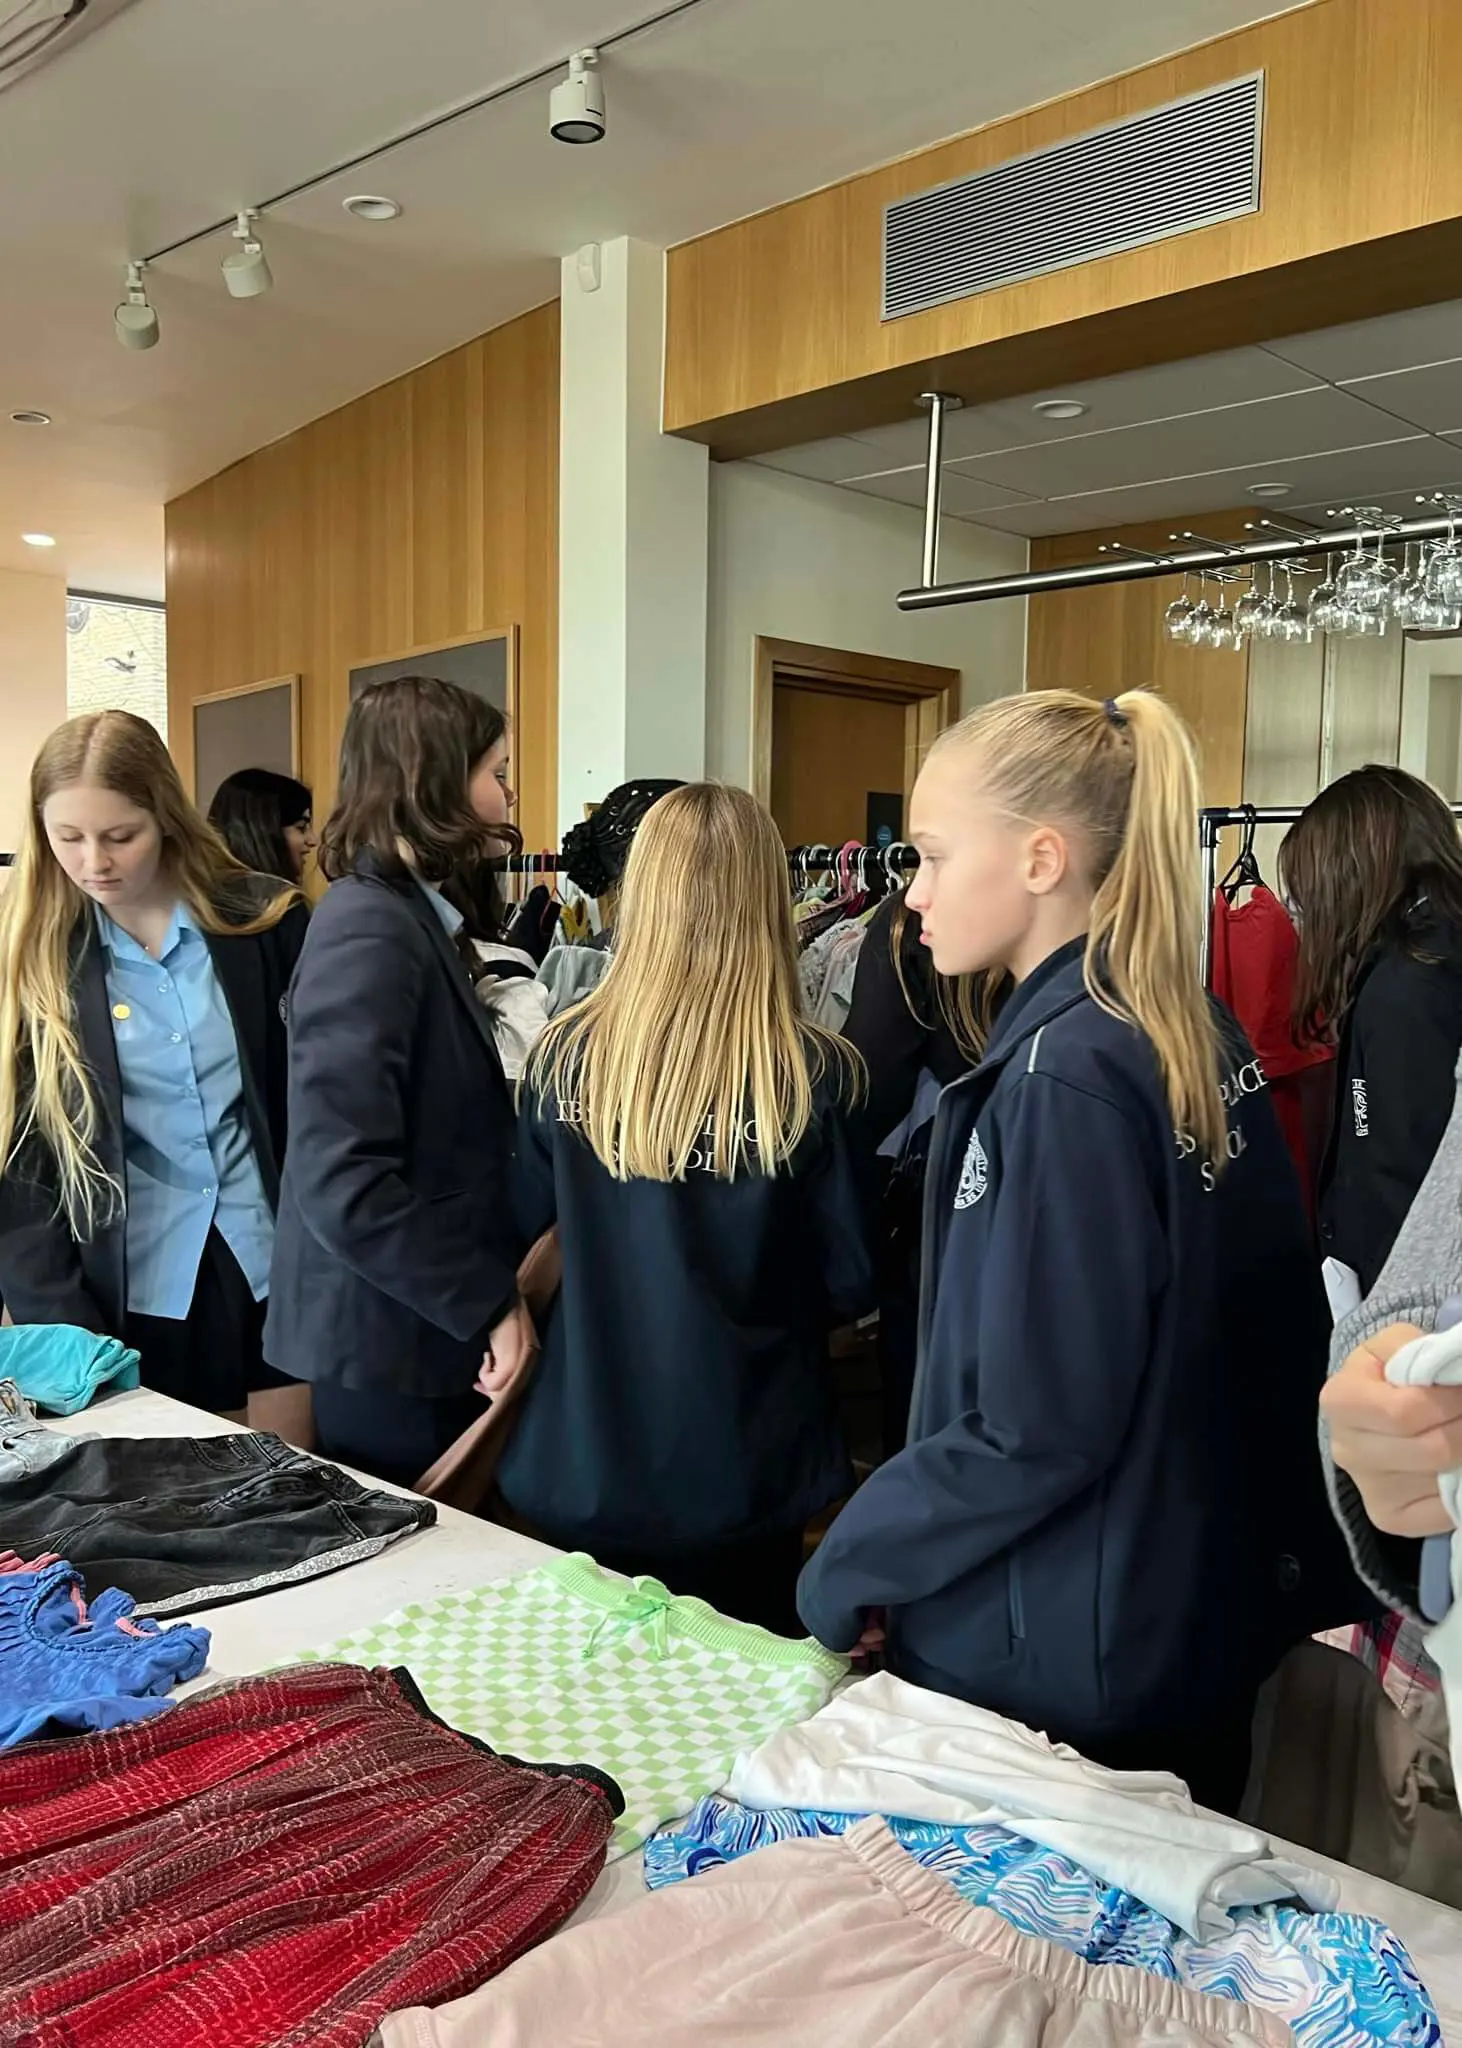 The Eco Society, in collaboration with FIPS, orchestrated Ibstock's second annual Clothes Swap in the theatre foyer of Ibstock Place School, Roehampton.